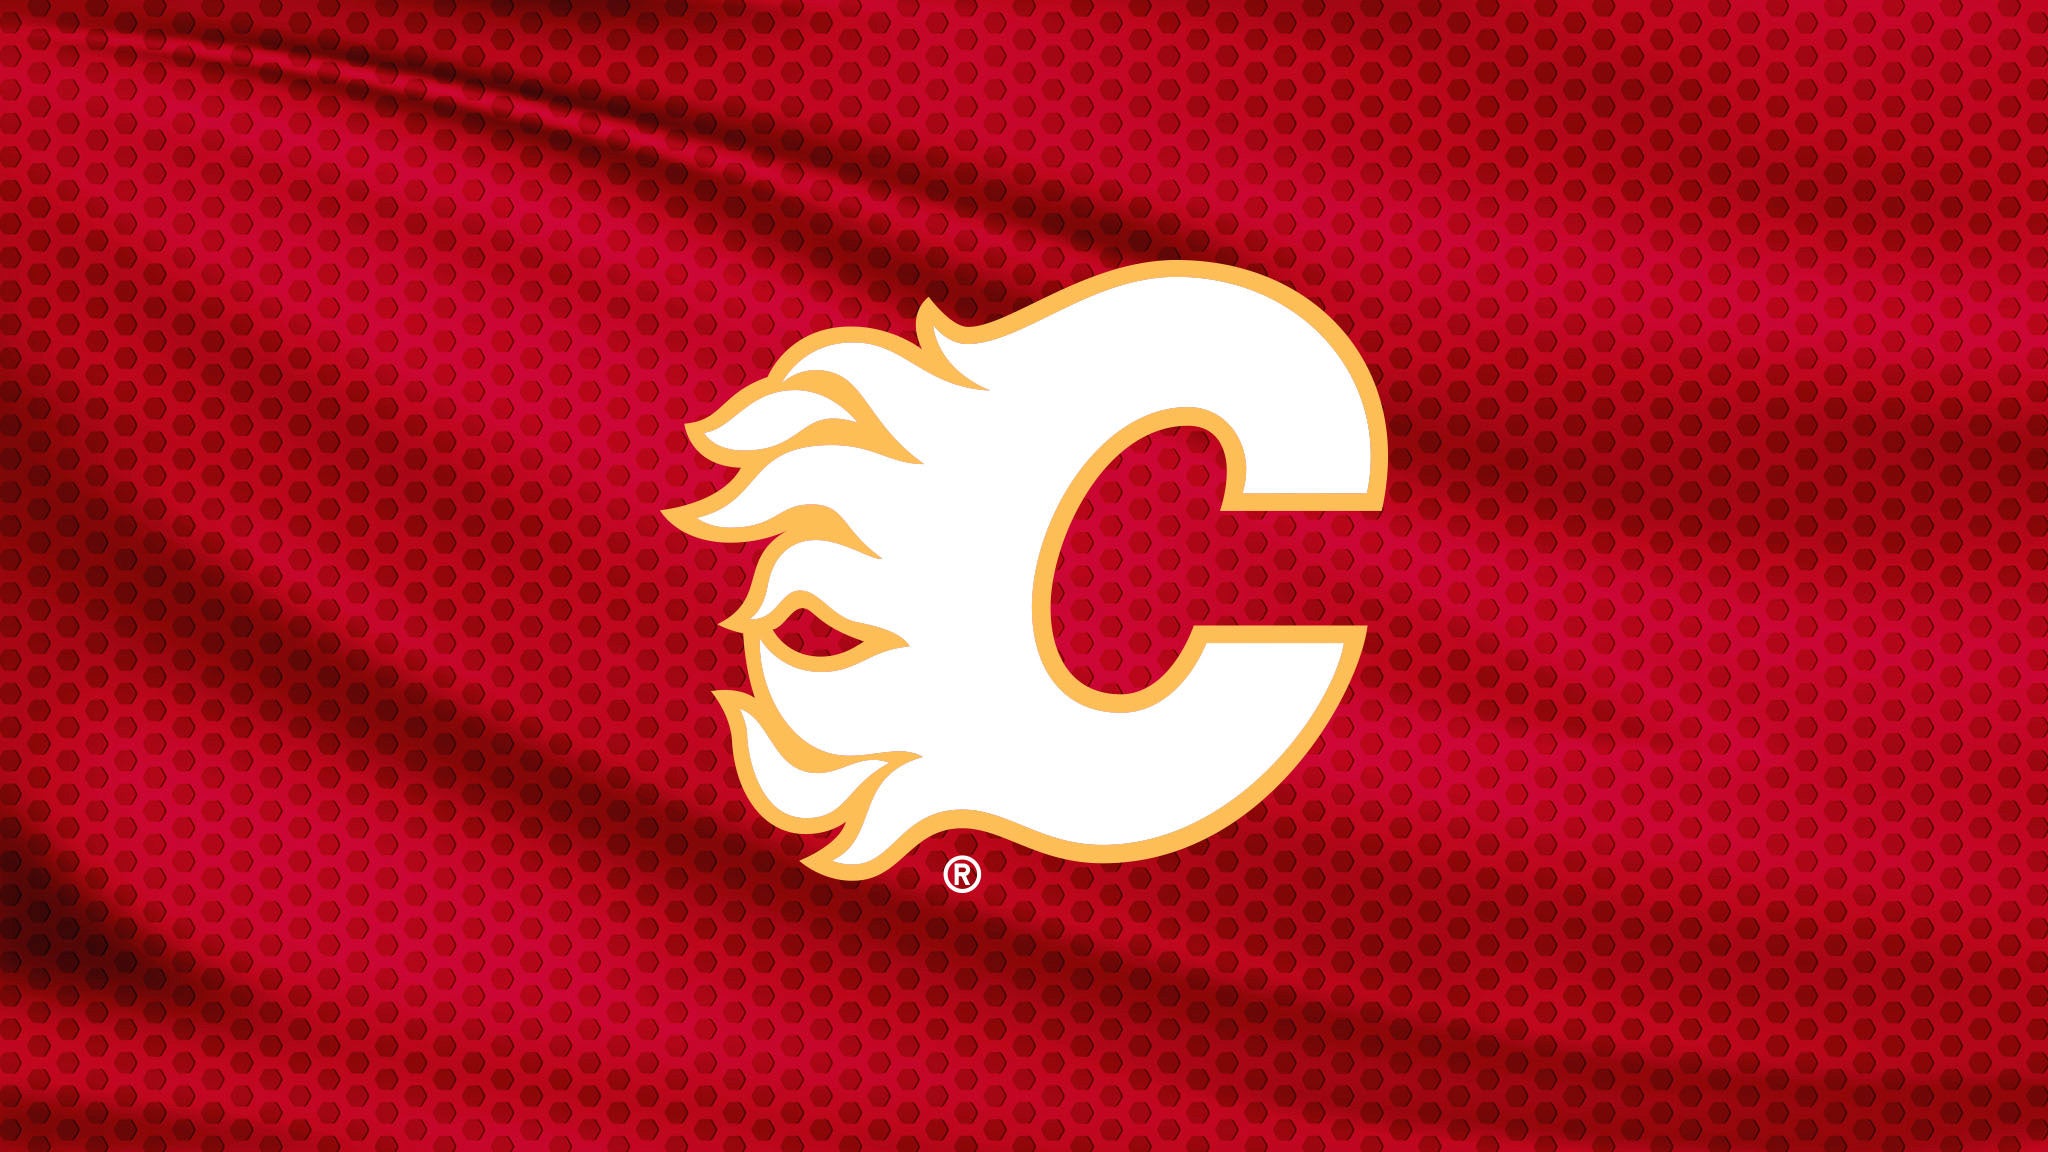 Calgary Flames vs. San Jose Sharks in Calgary promo photo for Scratchy Tuesday presale offer code